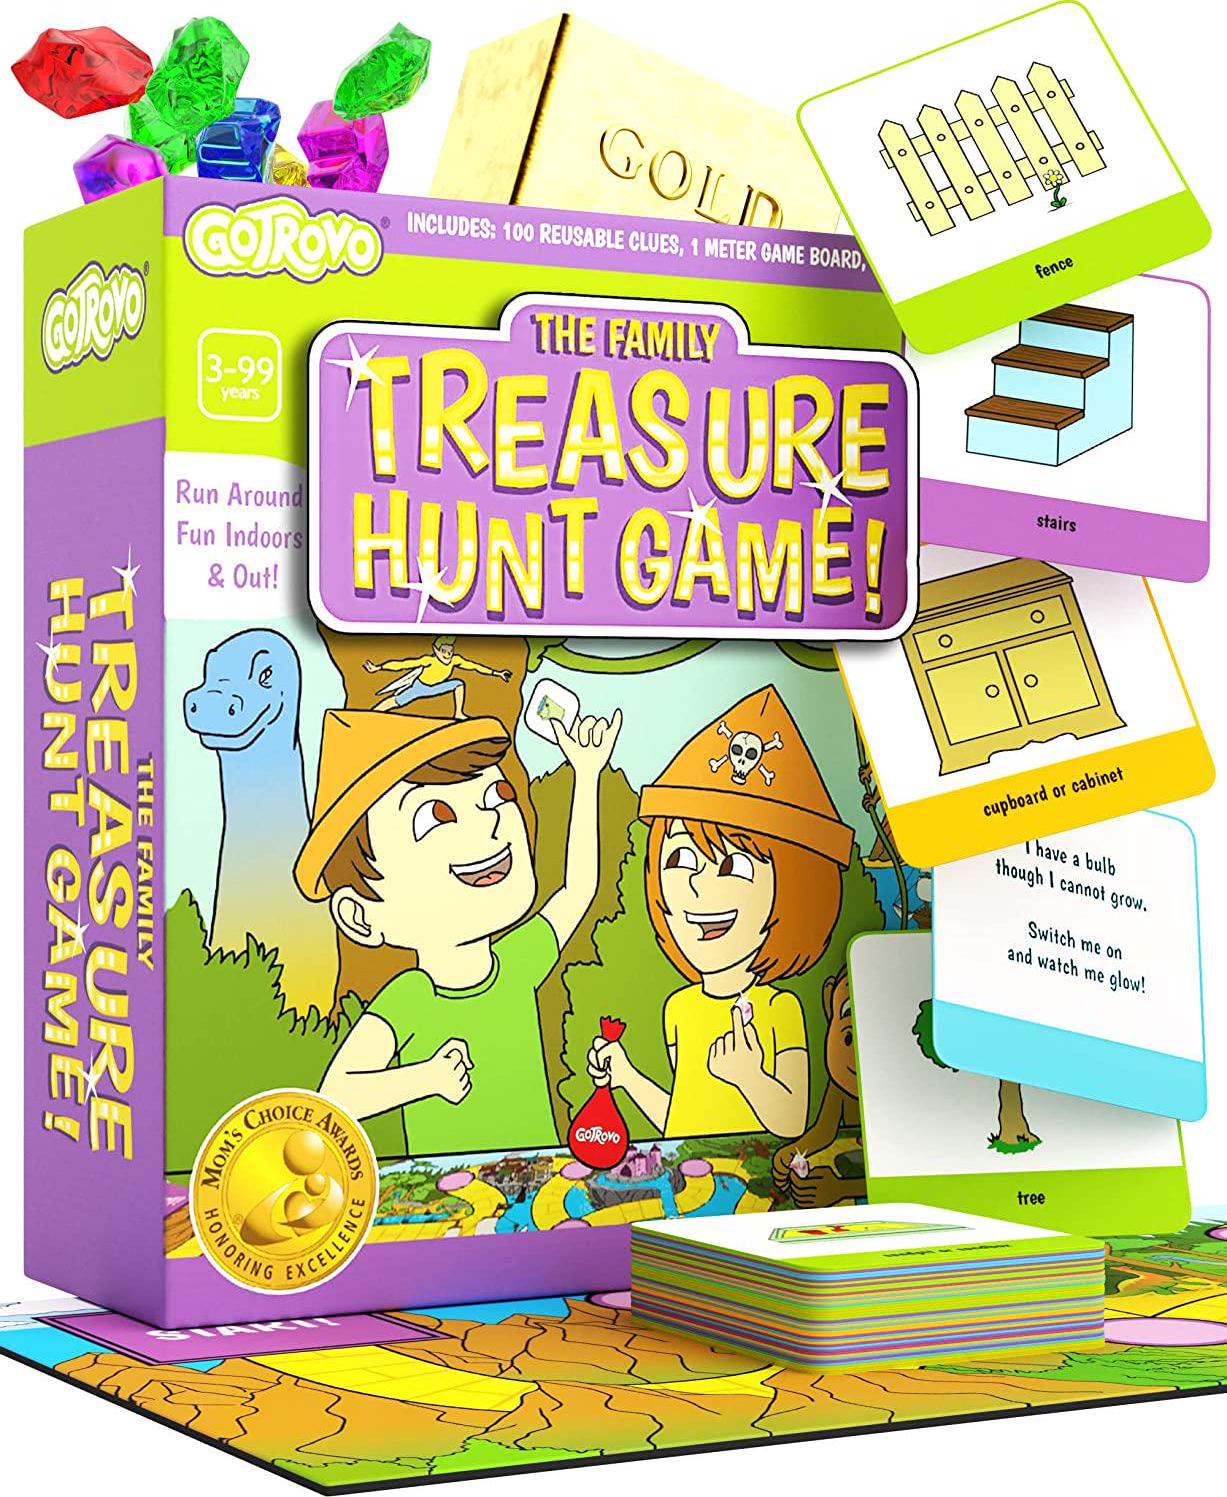 Gotrovo, (Gotrovo Standard) - Gotrovo Treasure Hunt Game Indoor Outdoor DIY Educational Activity for Kids Pirate and Scavenger Hunt Learn through Fun - 100 Clue Cards, Treasure Map, Treasure Bar, Gold Coins and Loot Bag